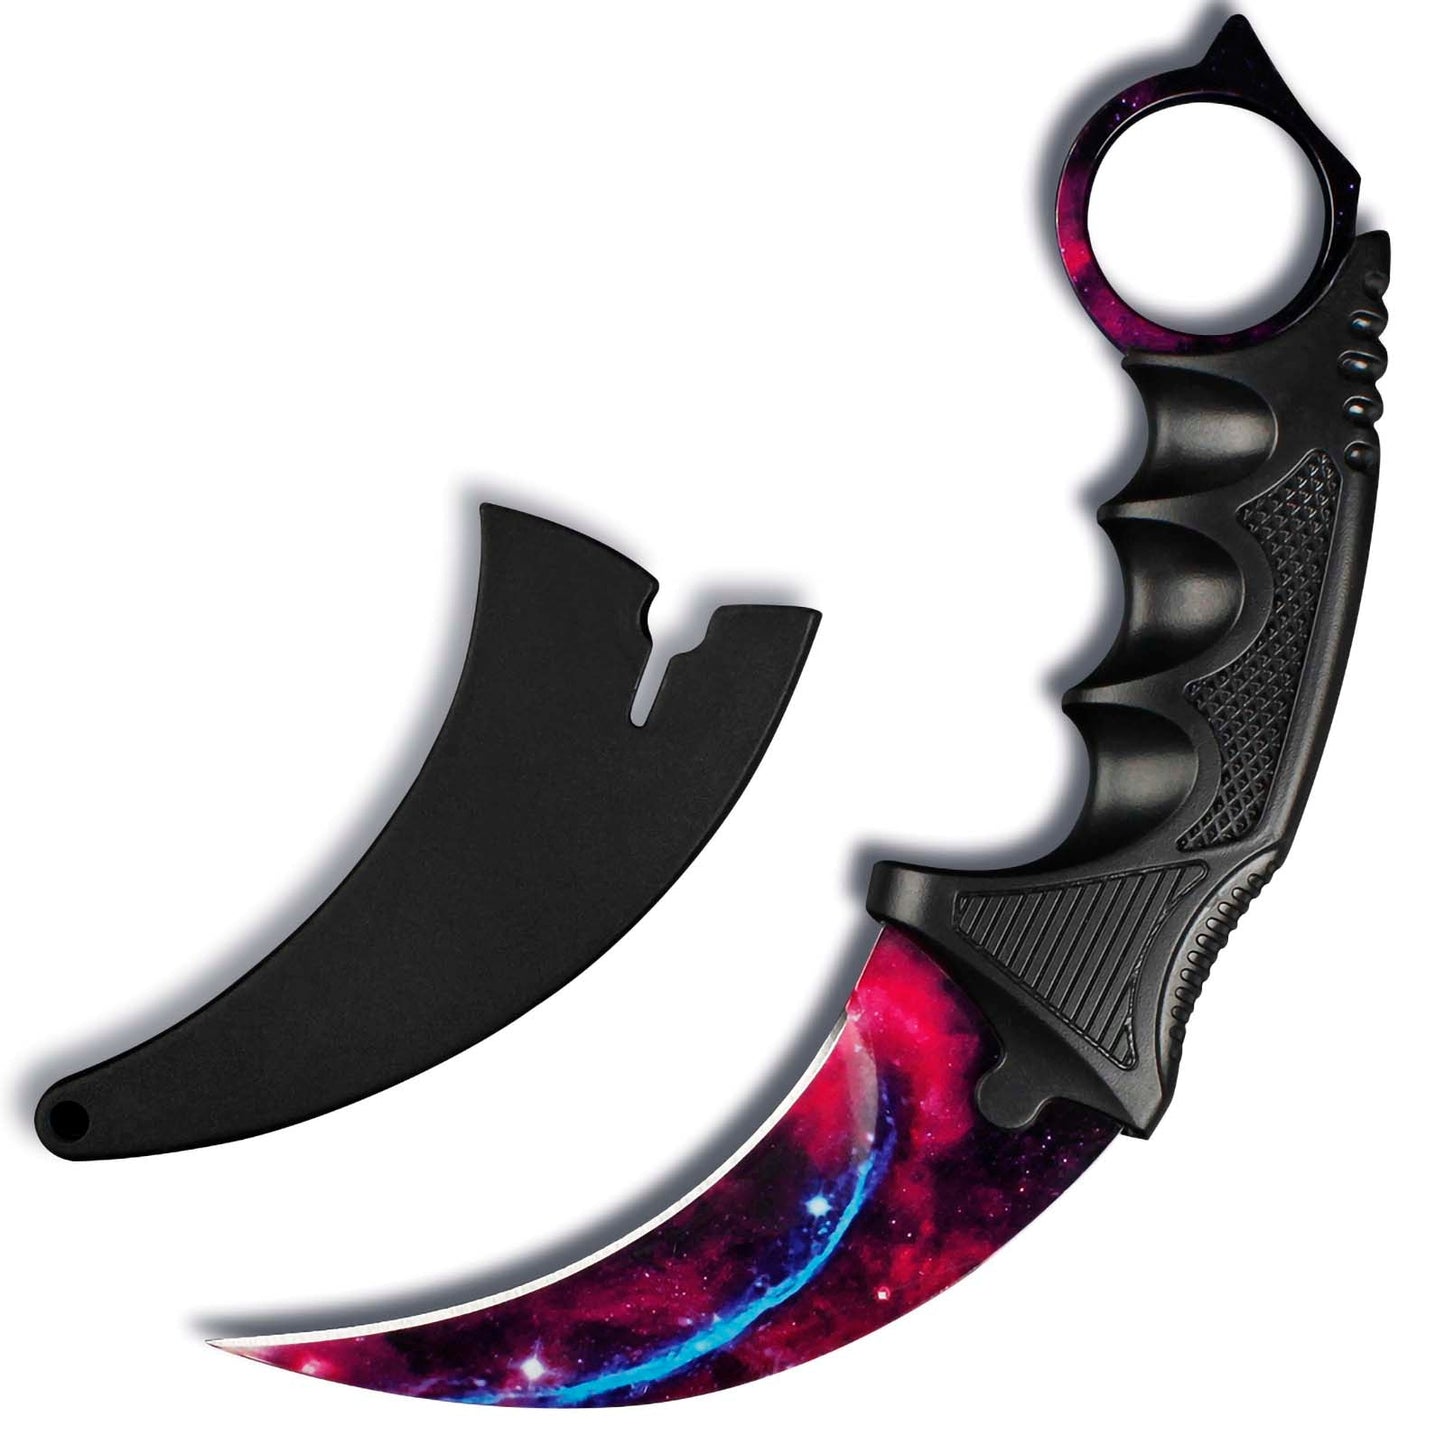 Andux Karambit Knife Tool with Cord CS/ZD-01 Purple+Red (ONLY Available in the United States)